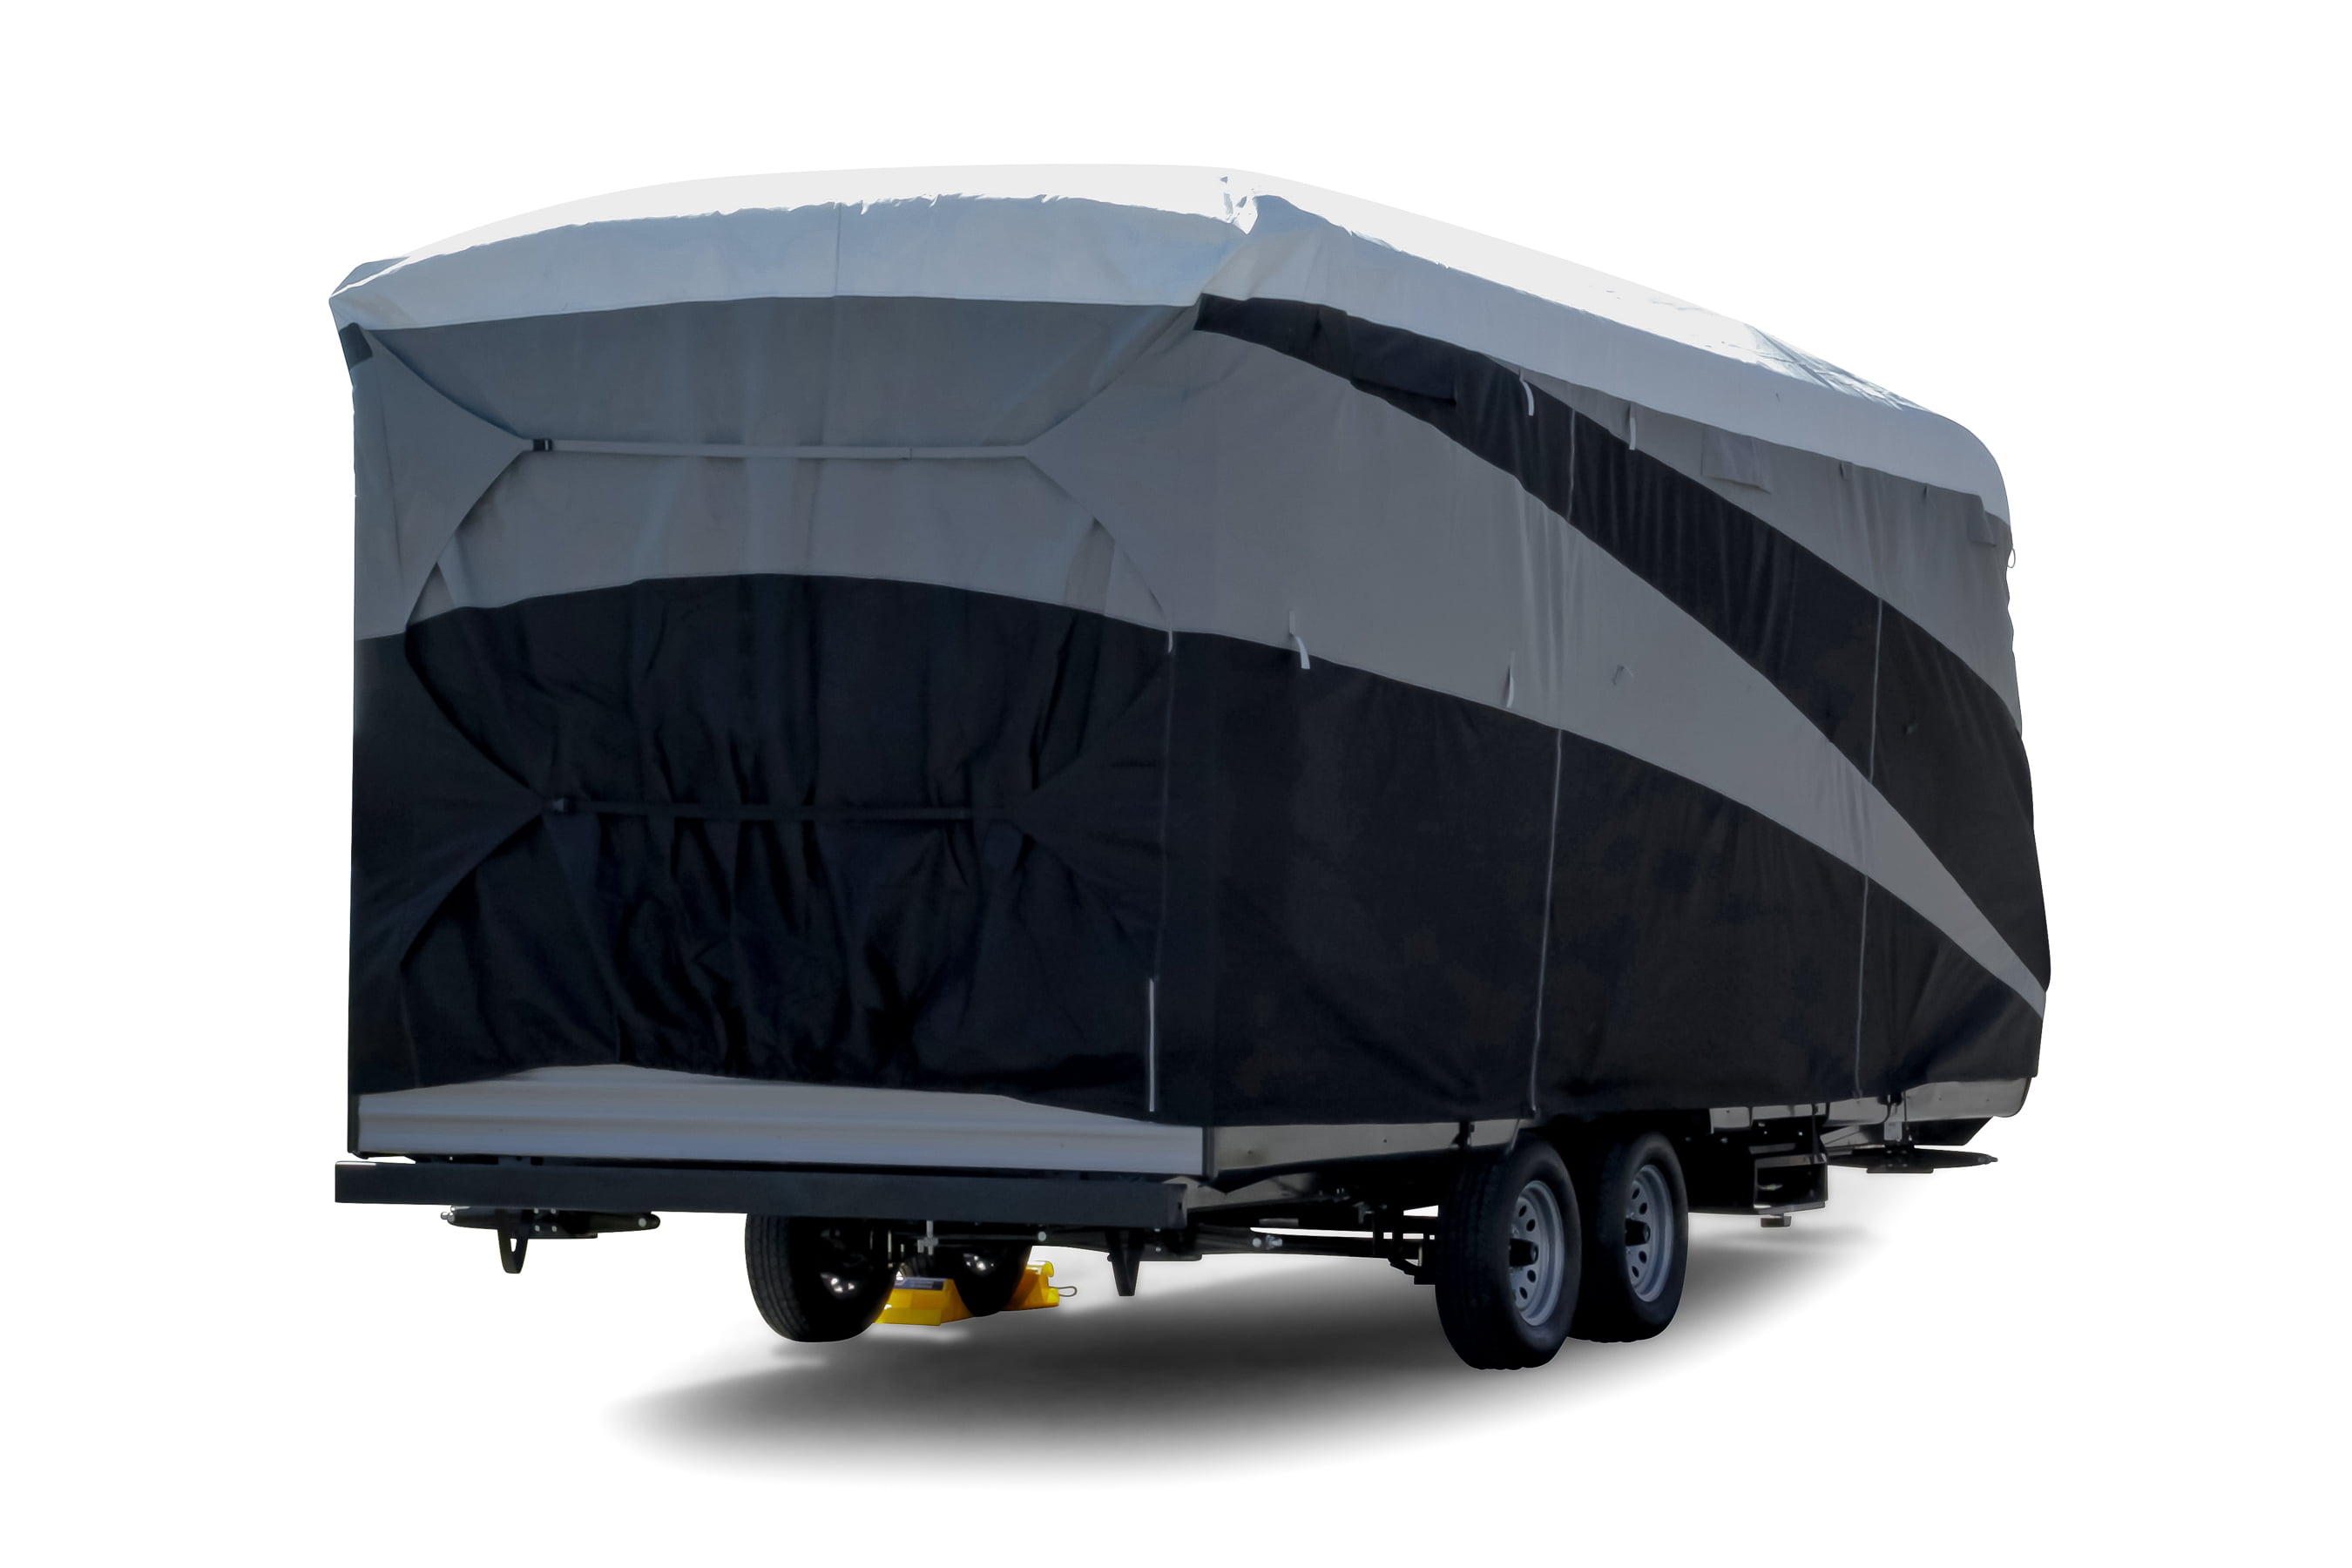 Camco 34-37 ULTRAGuard Supreme RV Cover-Extremely Durable Design Fits Travel Trailers Weatherproof with UV Protection and Dupont Tyvek Top 56138 